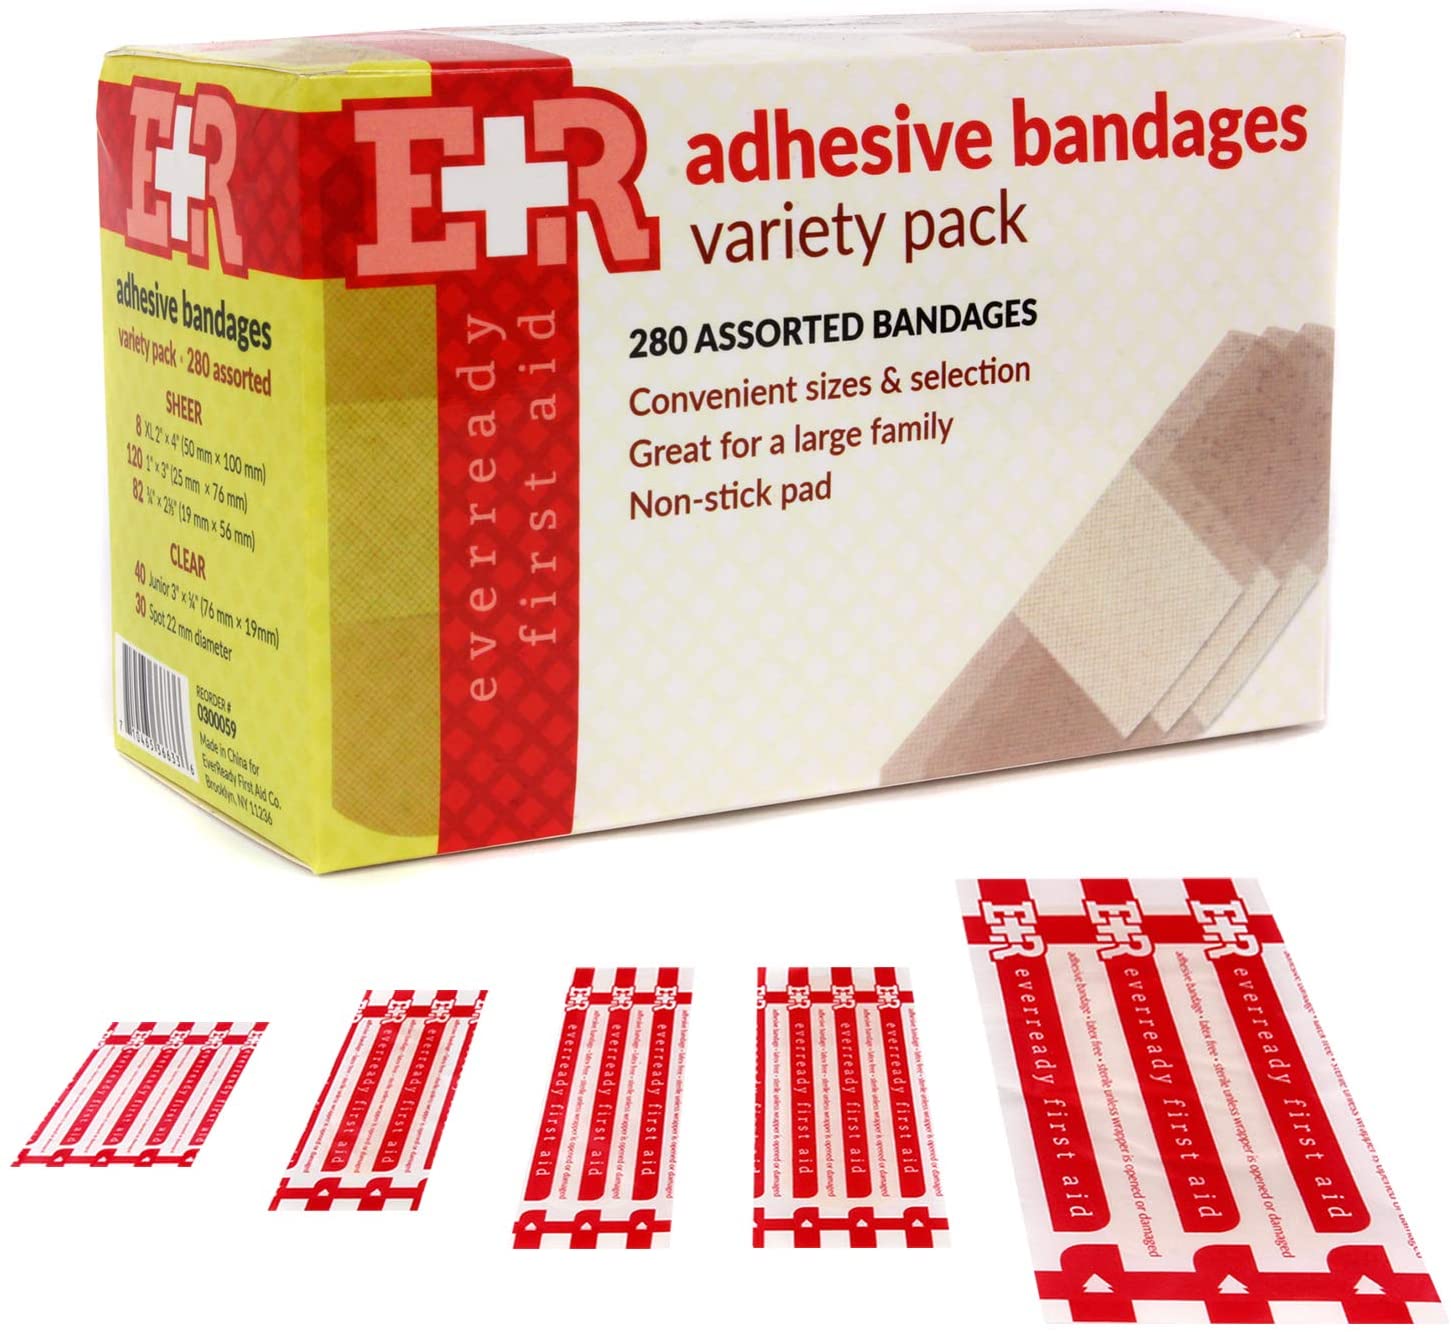 Ever Ready First Aid Quality Adhesive Bandages, Variety Pack of 280 Assorted Bandages